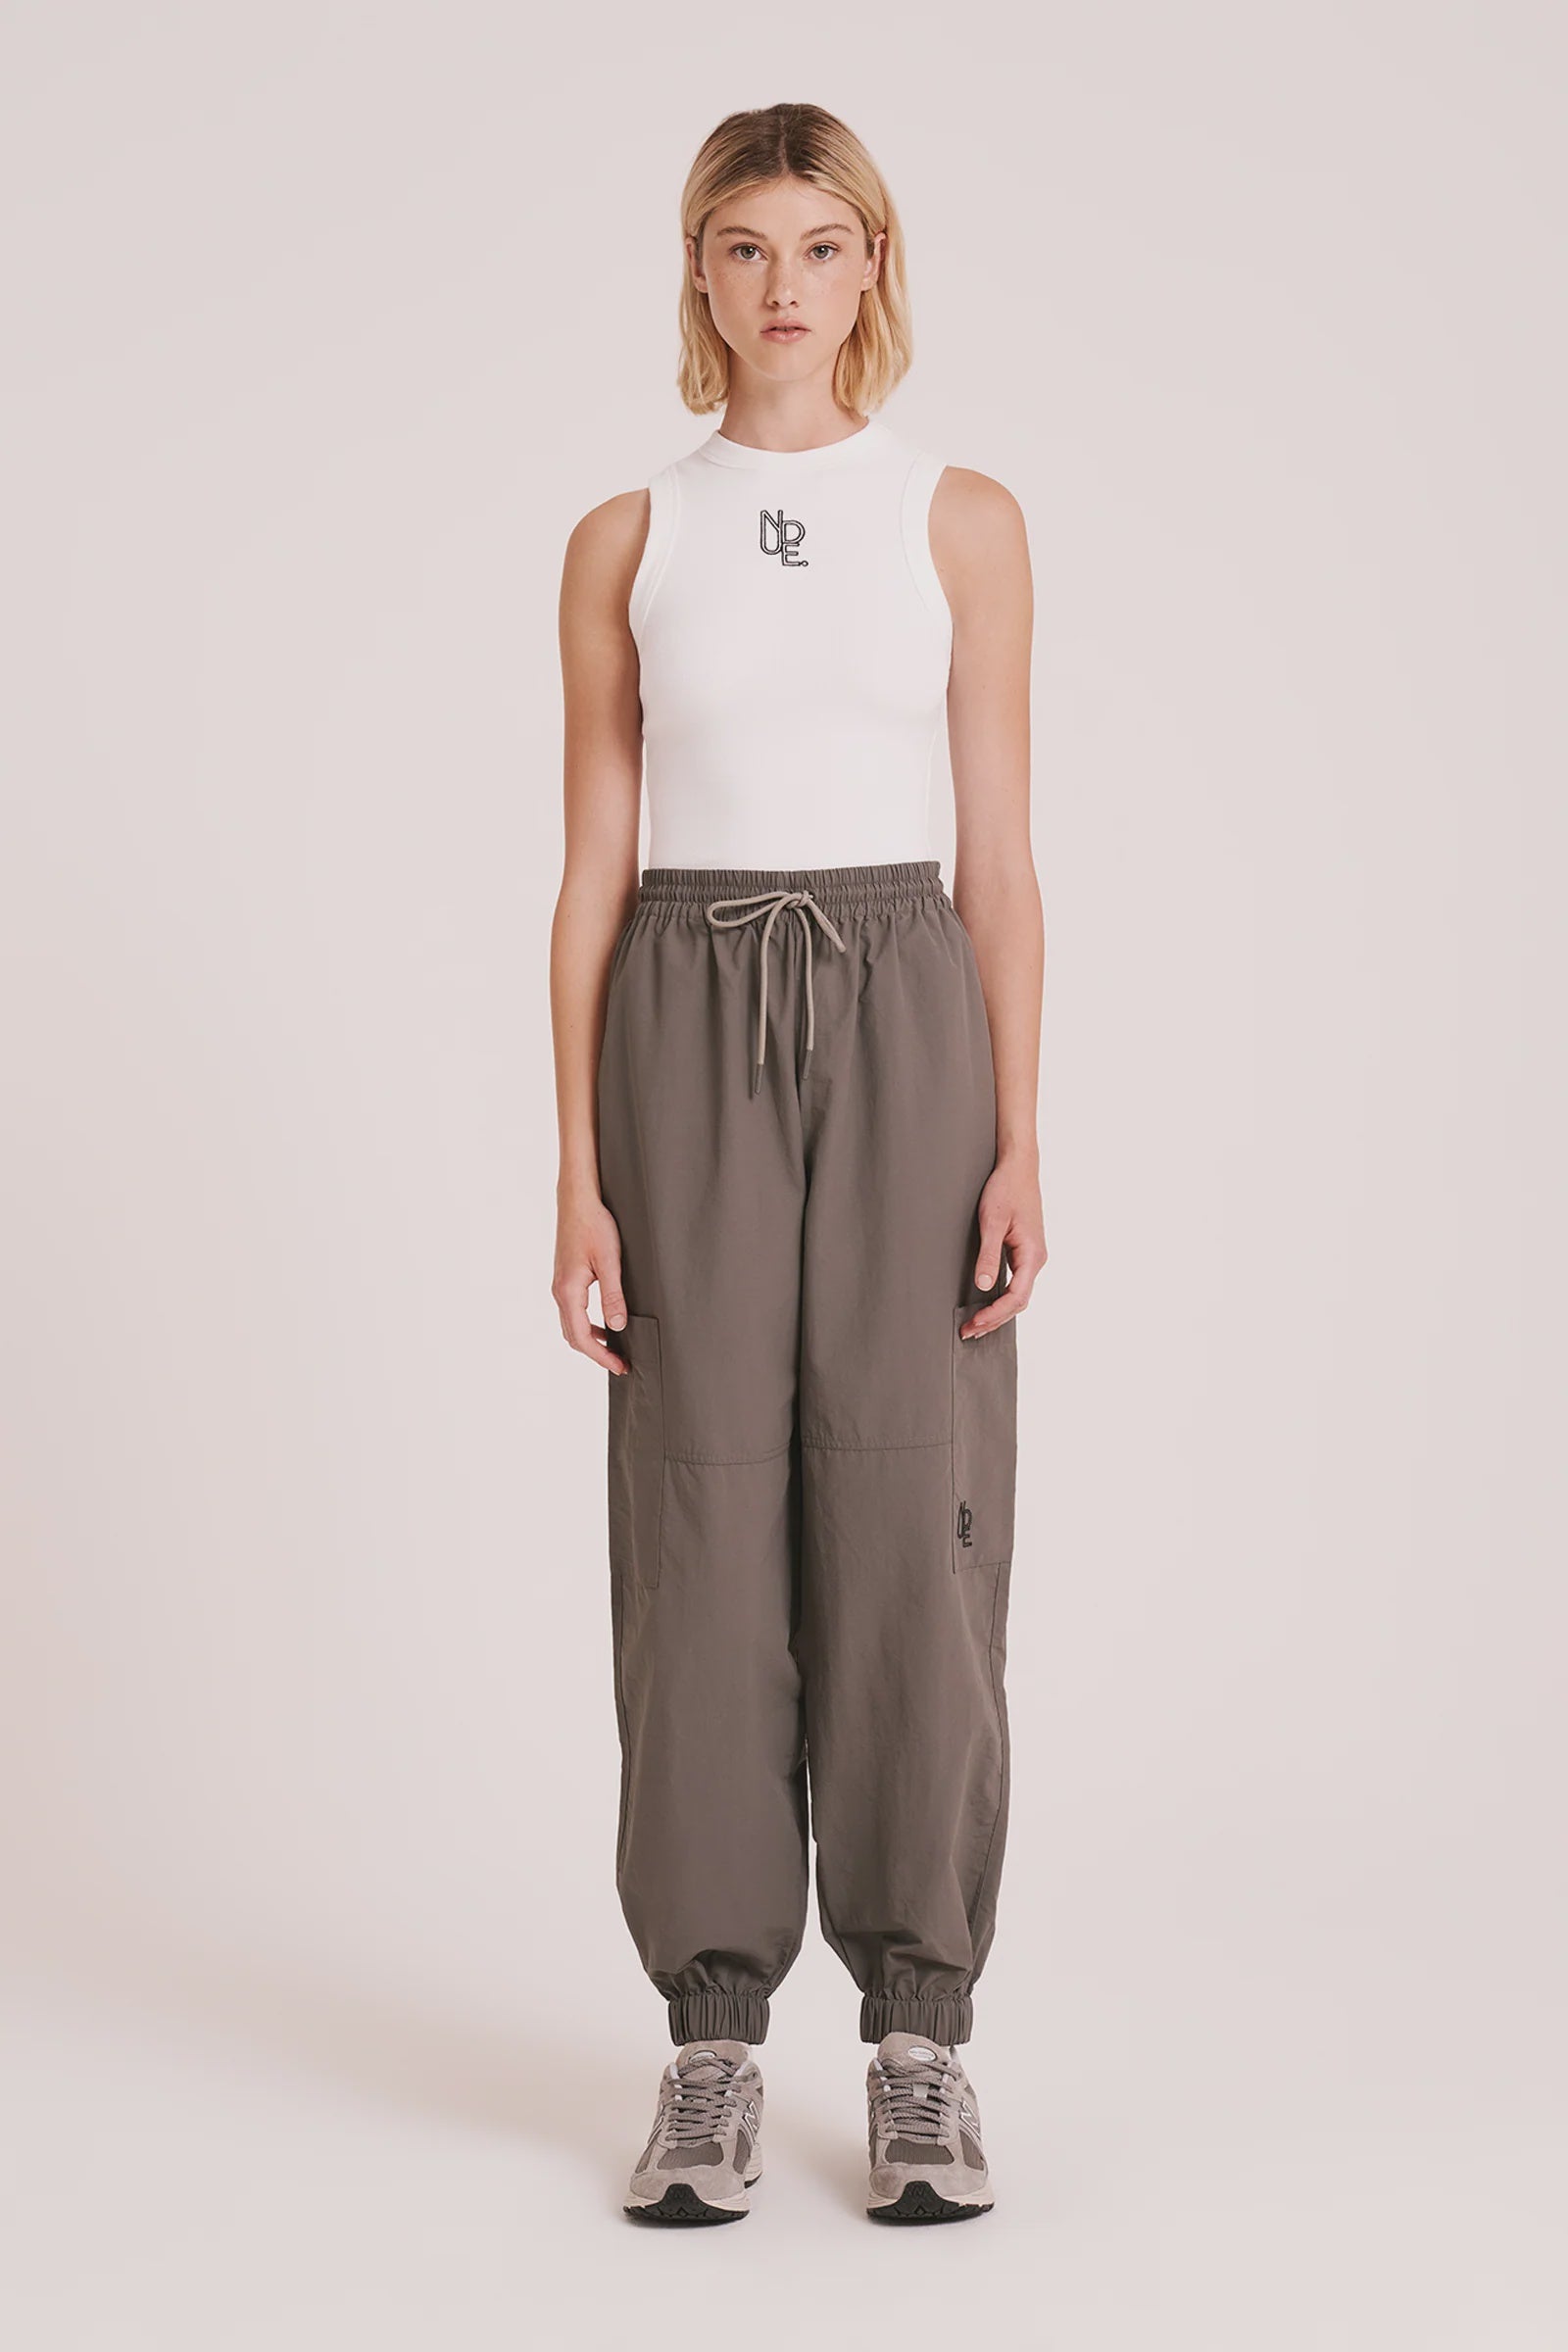 Nude Lucy | Presley Trackpant - Stilt